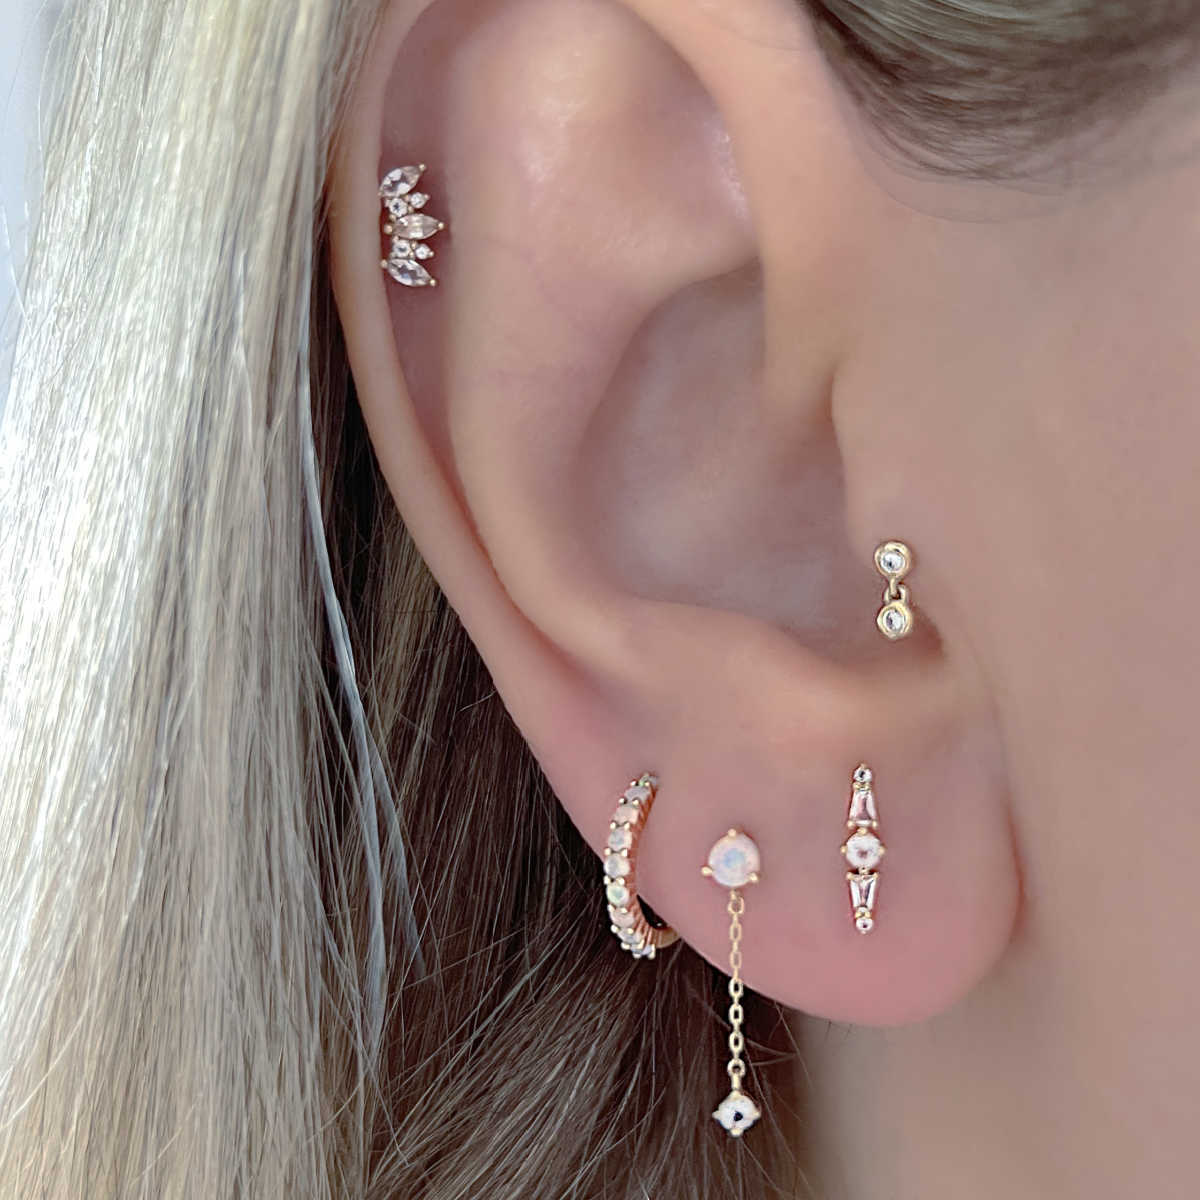 Cartilage Climber Earring | 14k Gold Helix Flat Back Piercing Studs from Two of Most